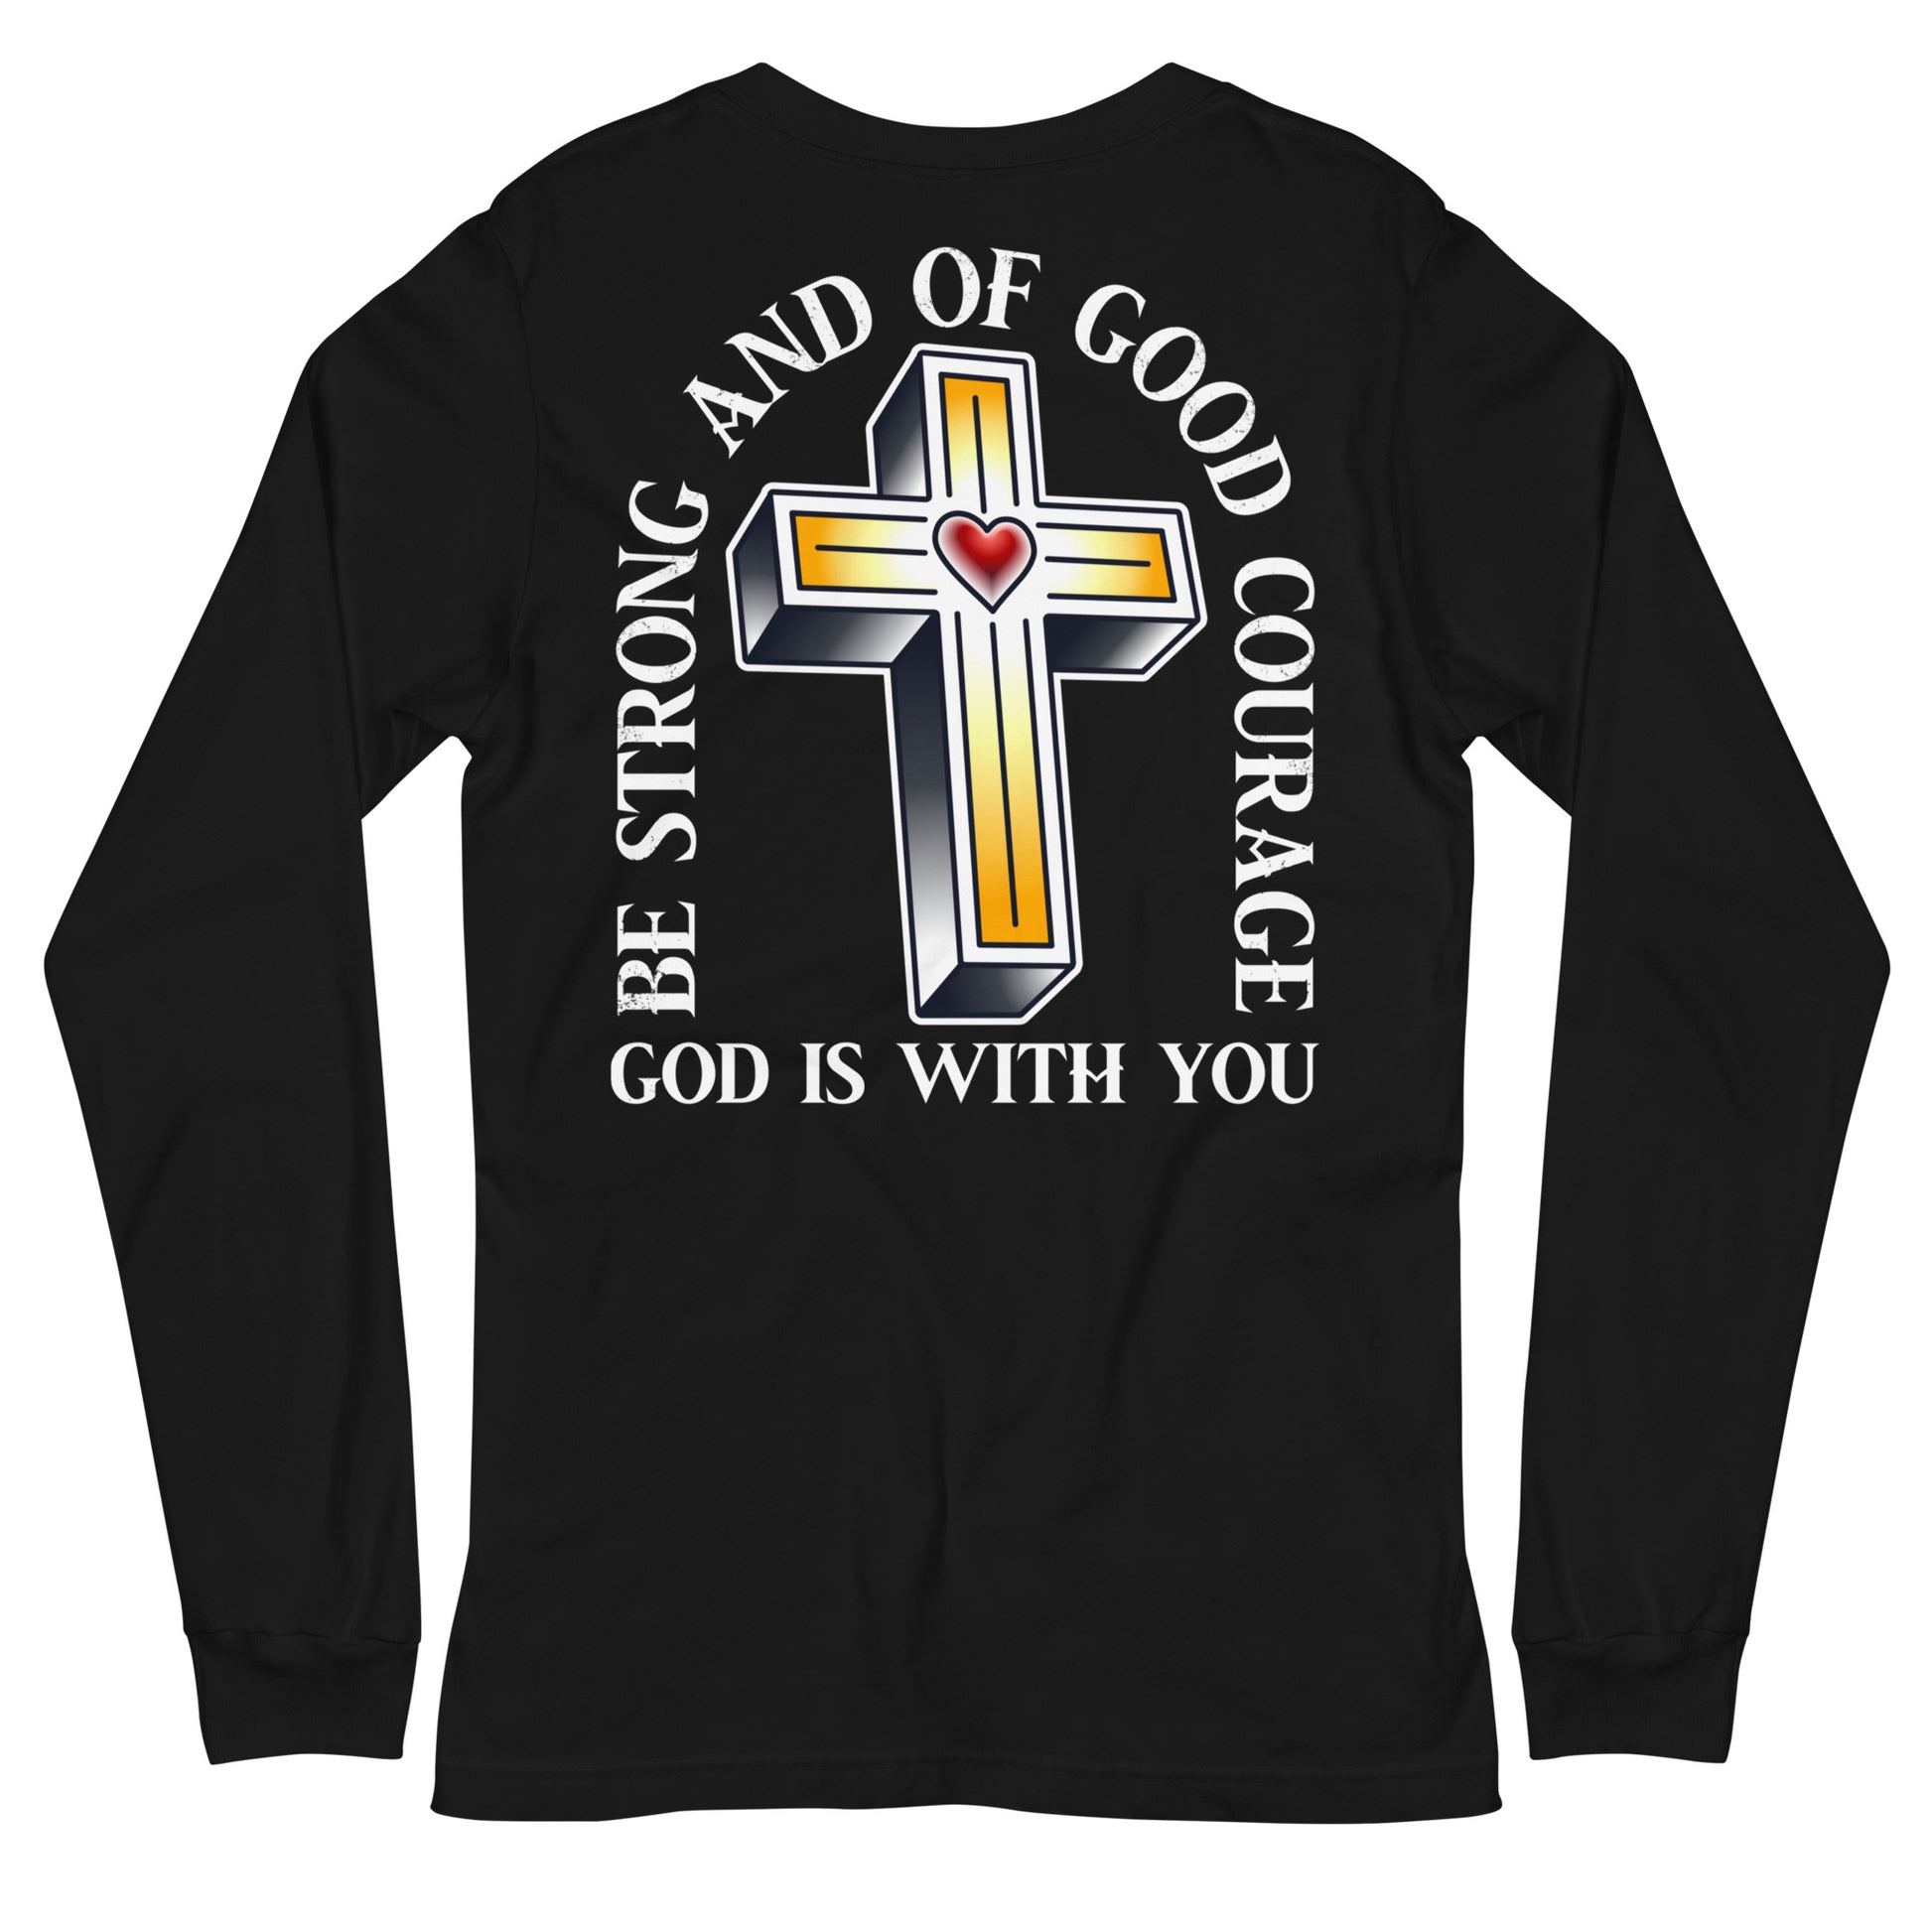 Be Strong, God is with You - Long Sleeve - For Your Courage